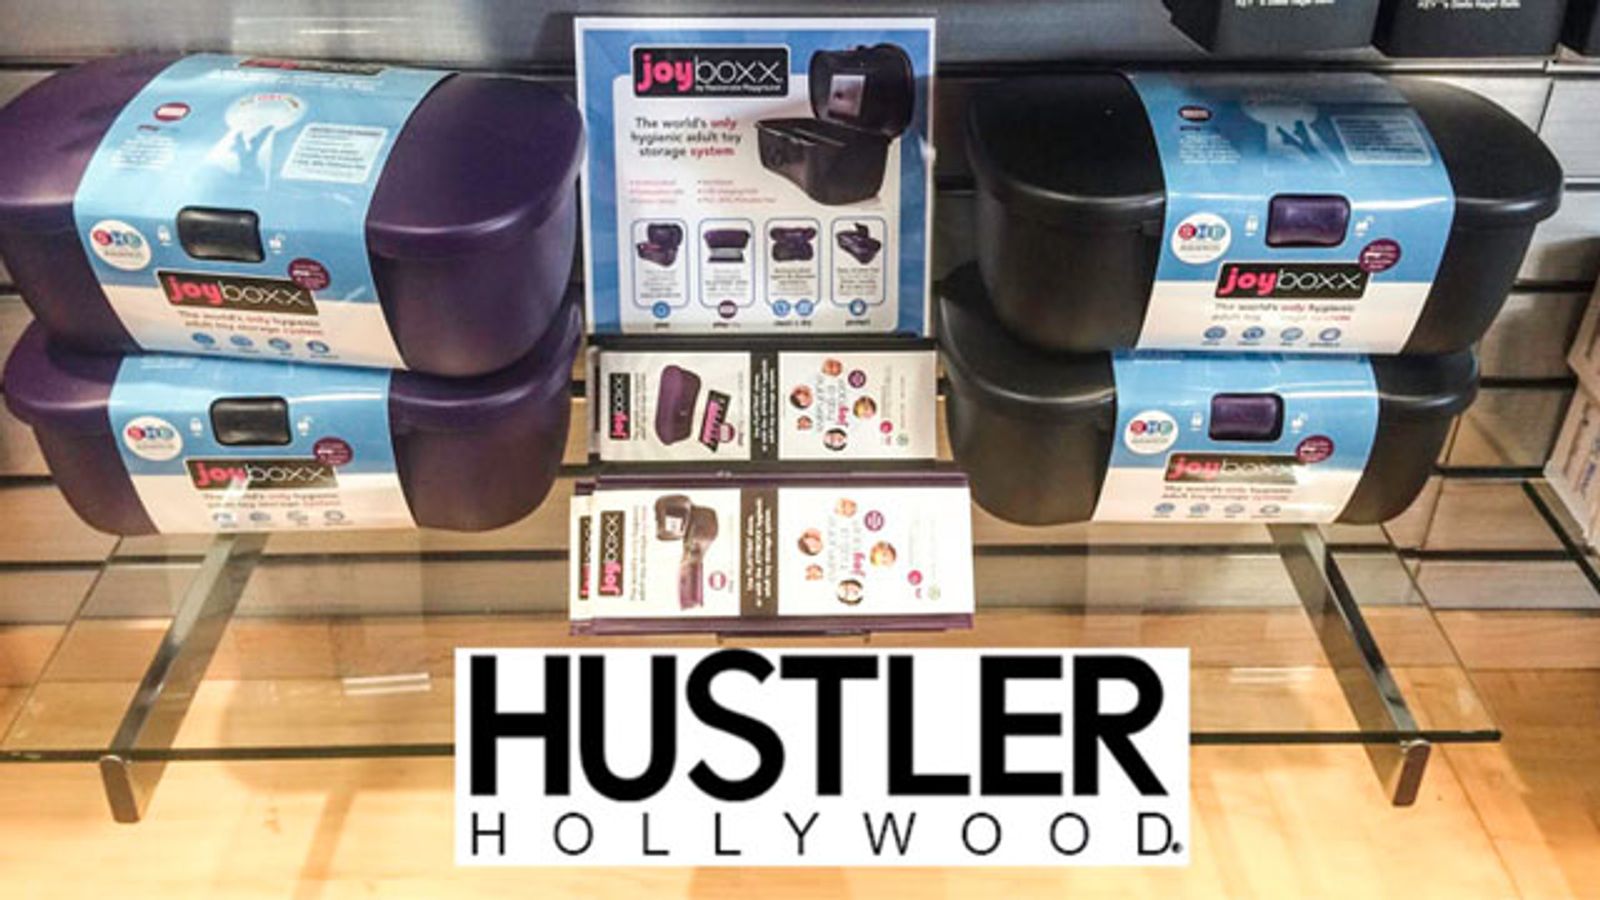 Hustler Hollywood Stores Successfully Launch Joyboxx